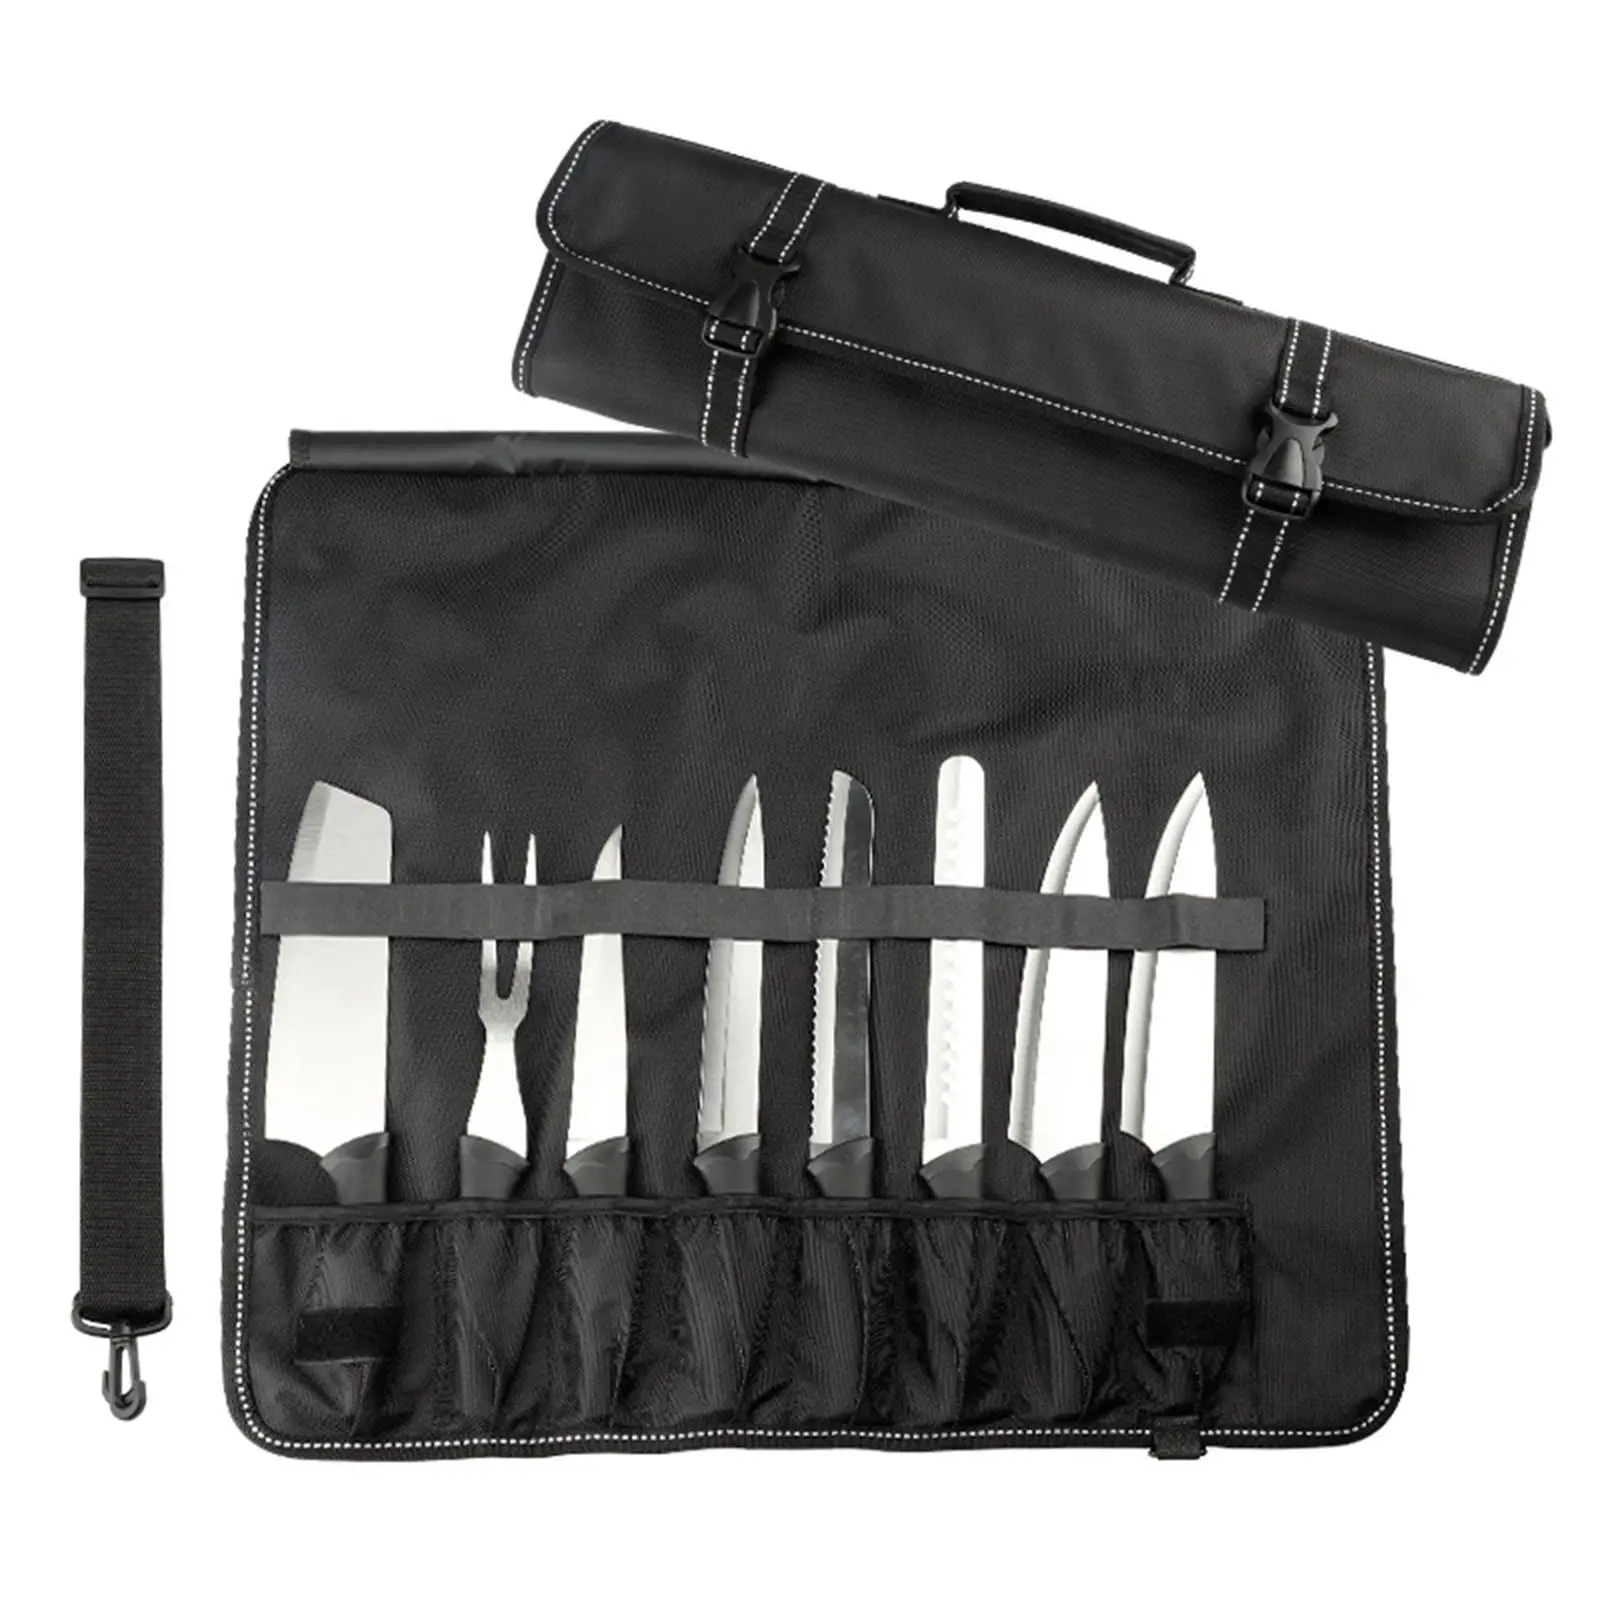 Chef Knives Roll Bag Adjustable Strap Portable Handle Knives Wrap Wallet Organizer Bag for Kitchen Home Chinese Western Knives